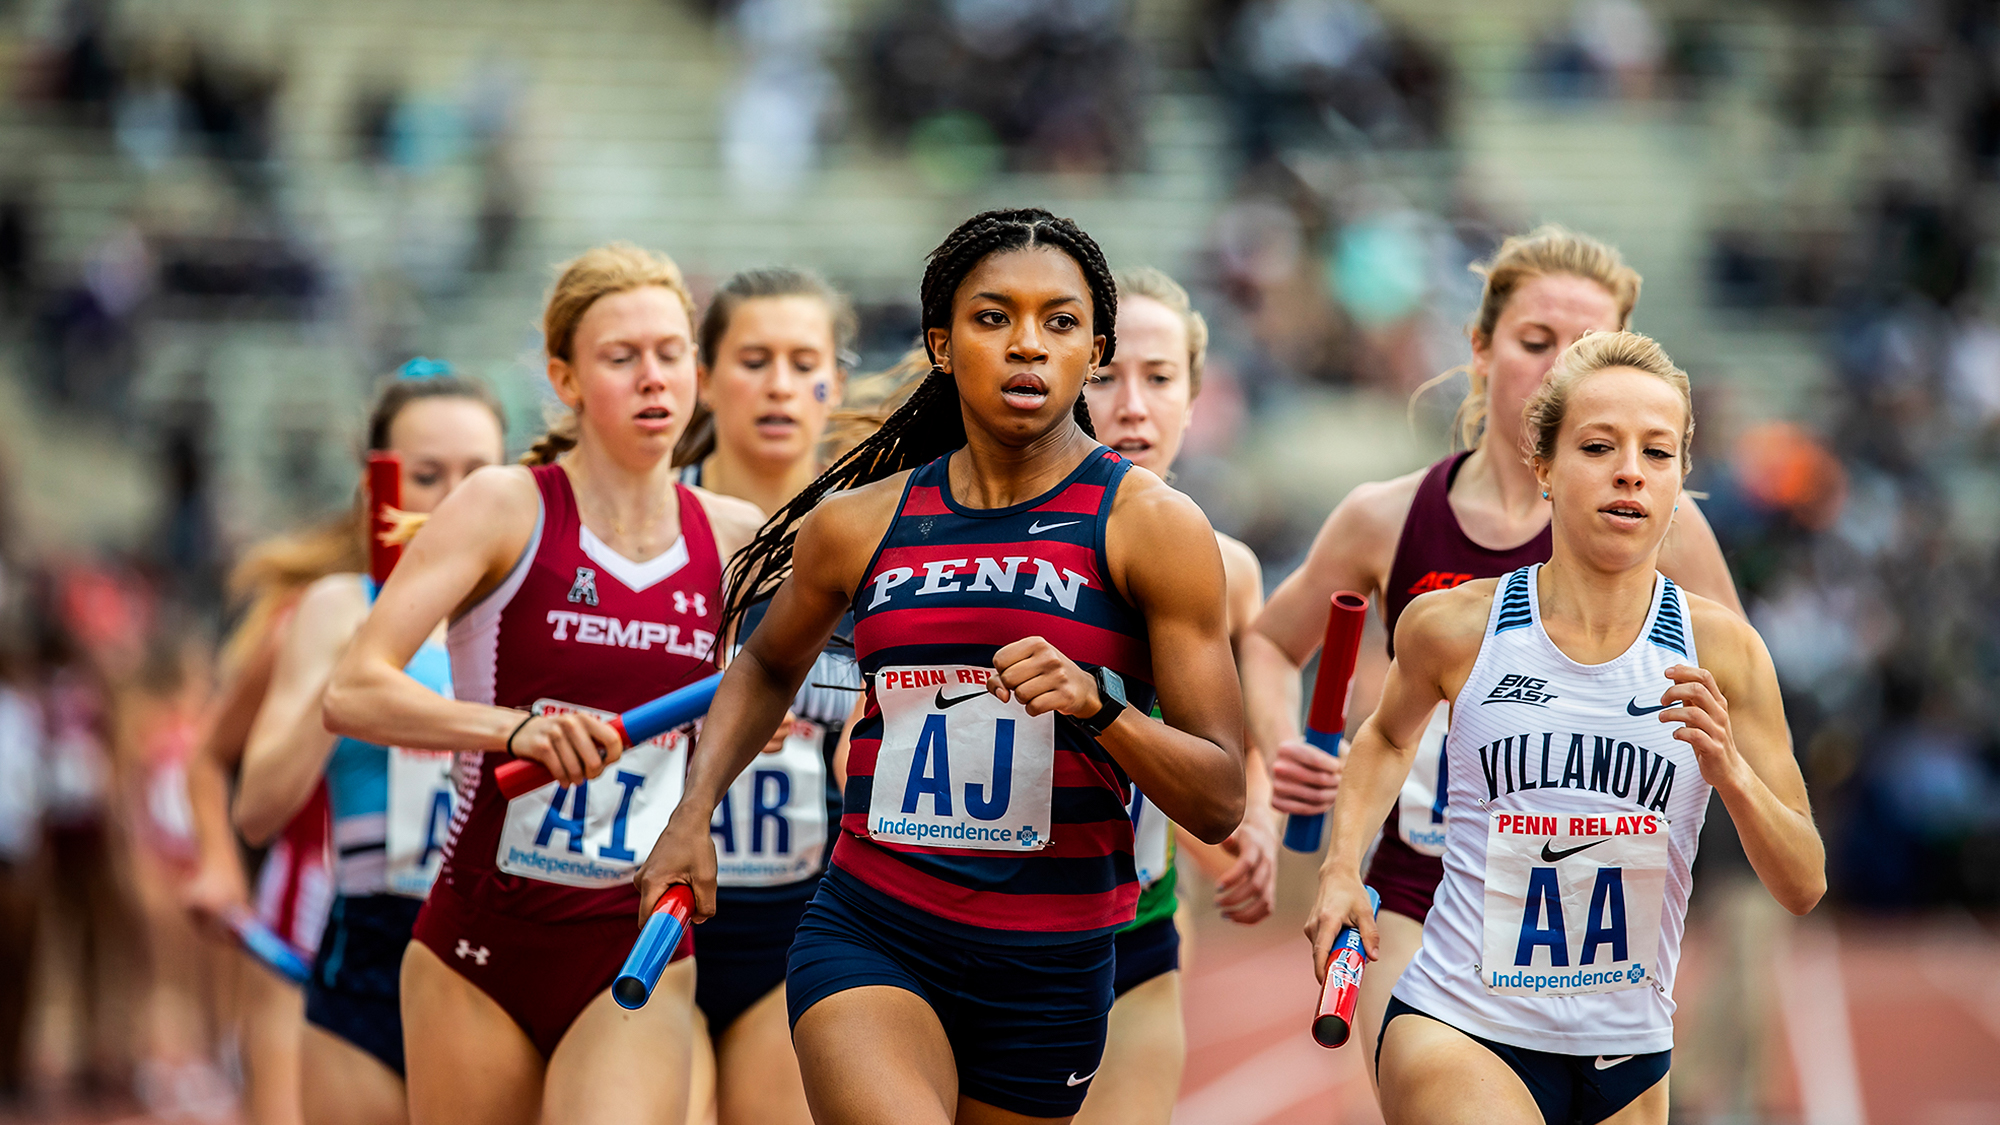 Nia Akins leads a pack of runners during the Penn Relays.